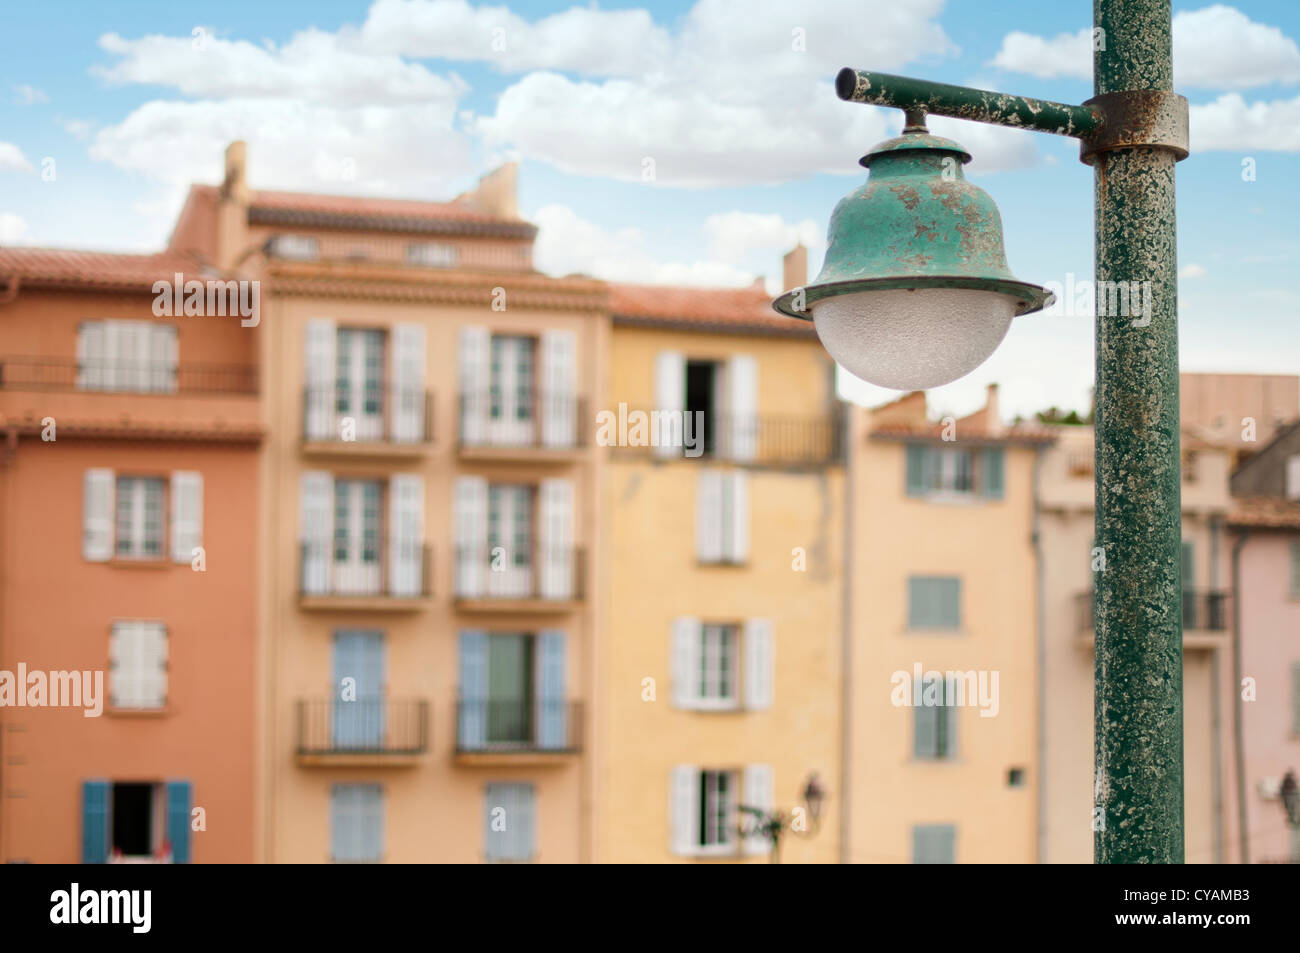 Ancient buildings in St. Tropez. Old street lamp Stock Photo